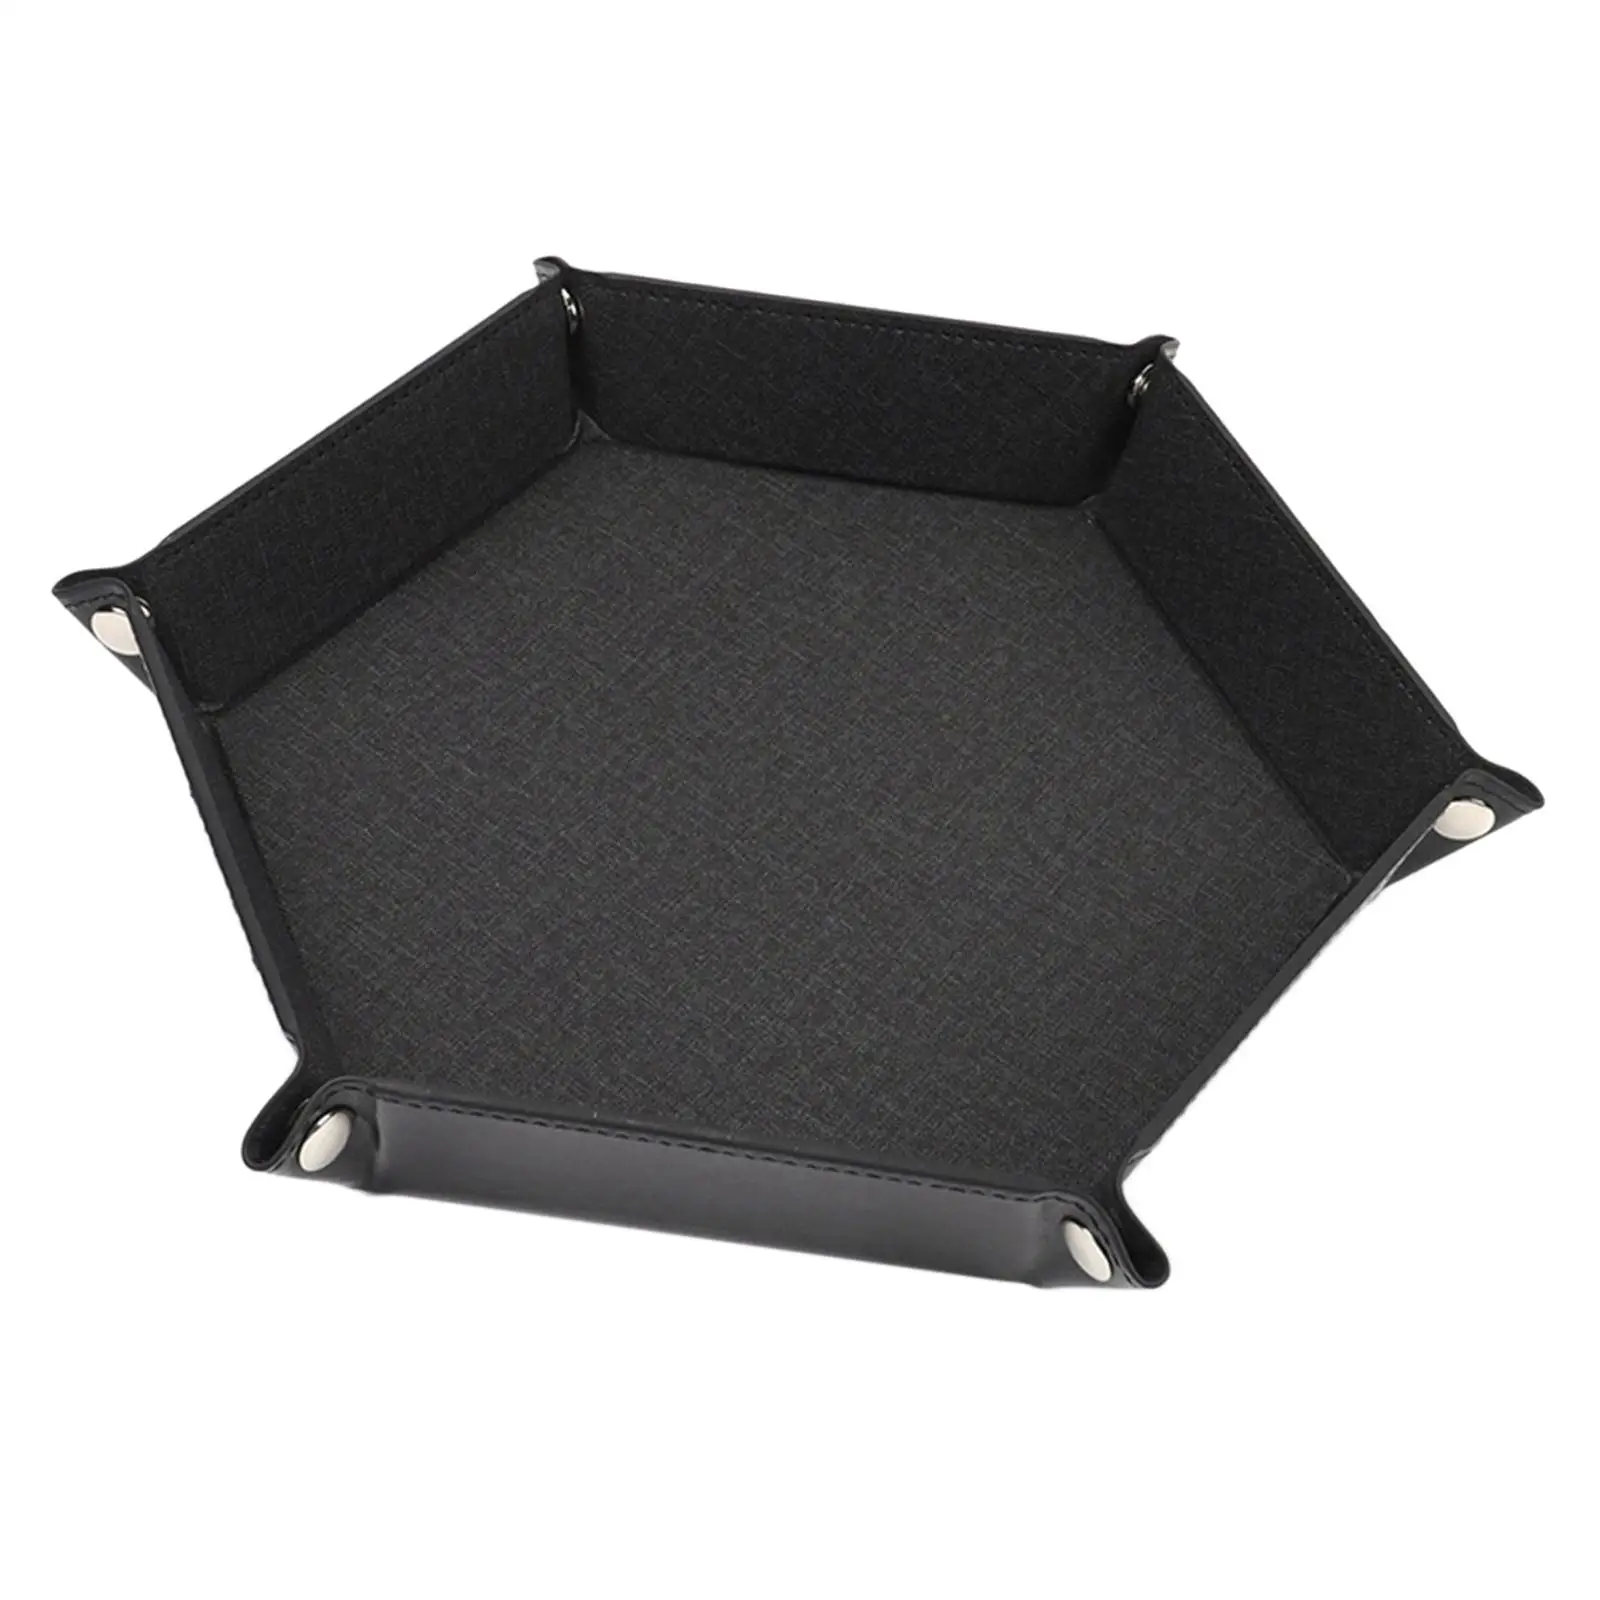 Hexagon Dice Tray Durable Multifunctional Wearable Holder Storage Box Folding Dice Rolling Tray for Earbuds Keys Stuff Sundries